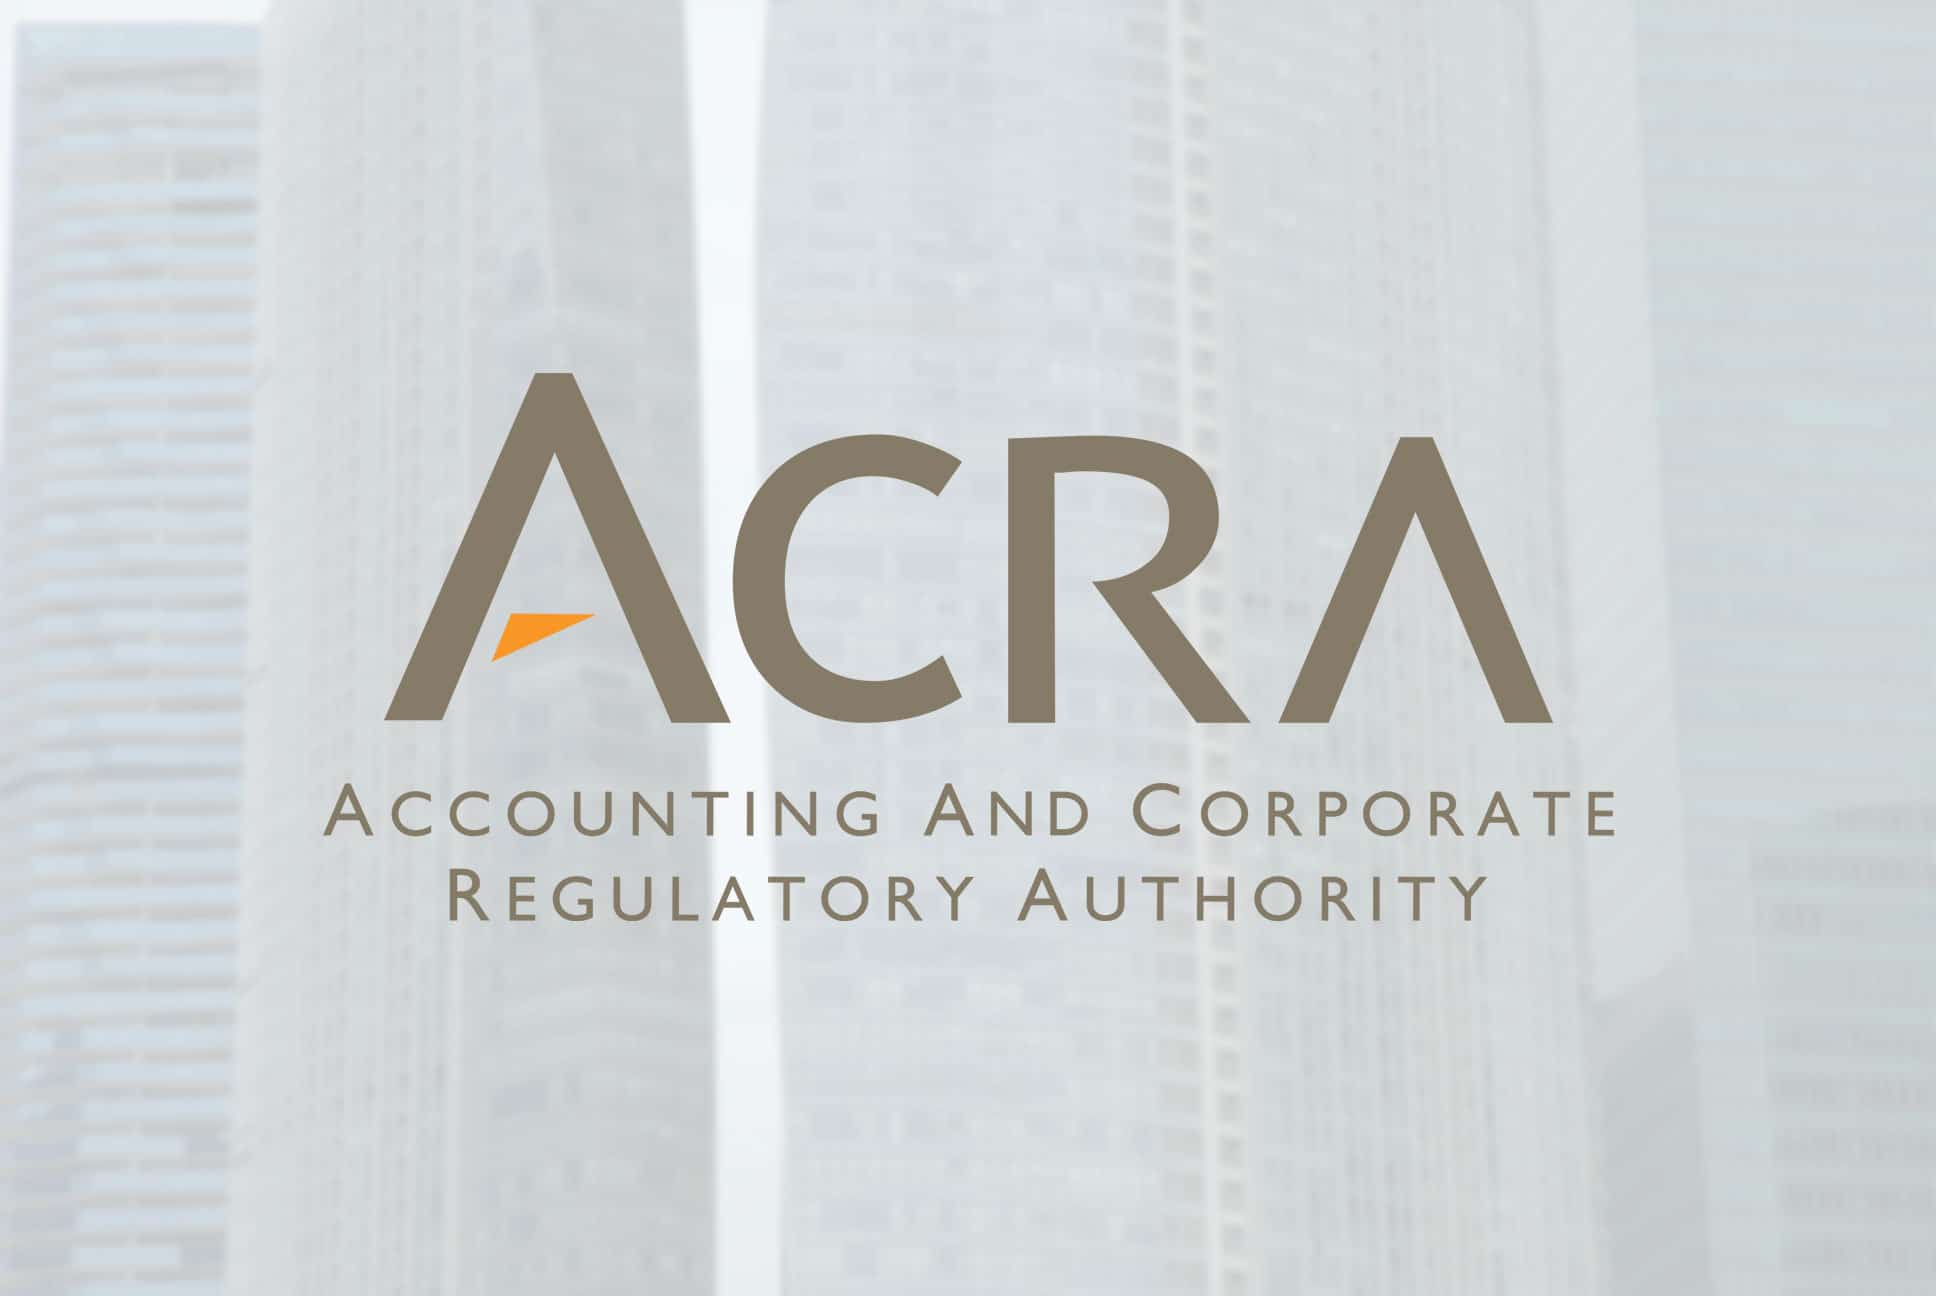 acra logo overlaying corporate buildings concept for small company audit exemptions in Singapore